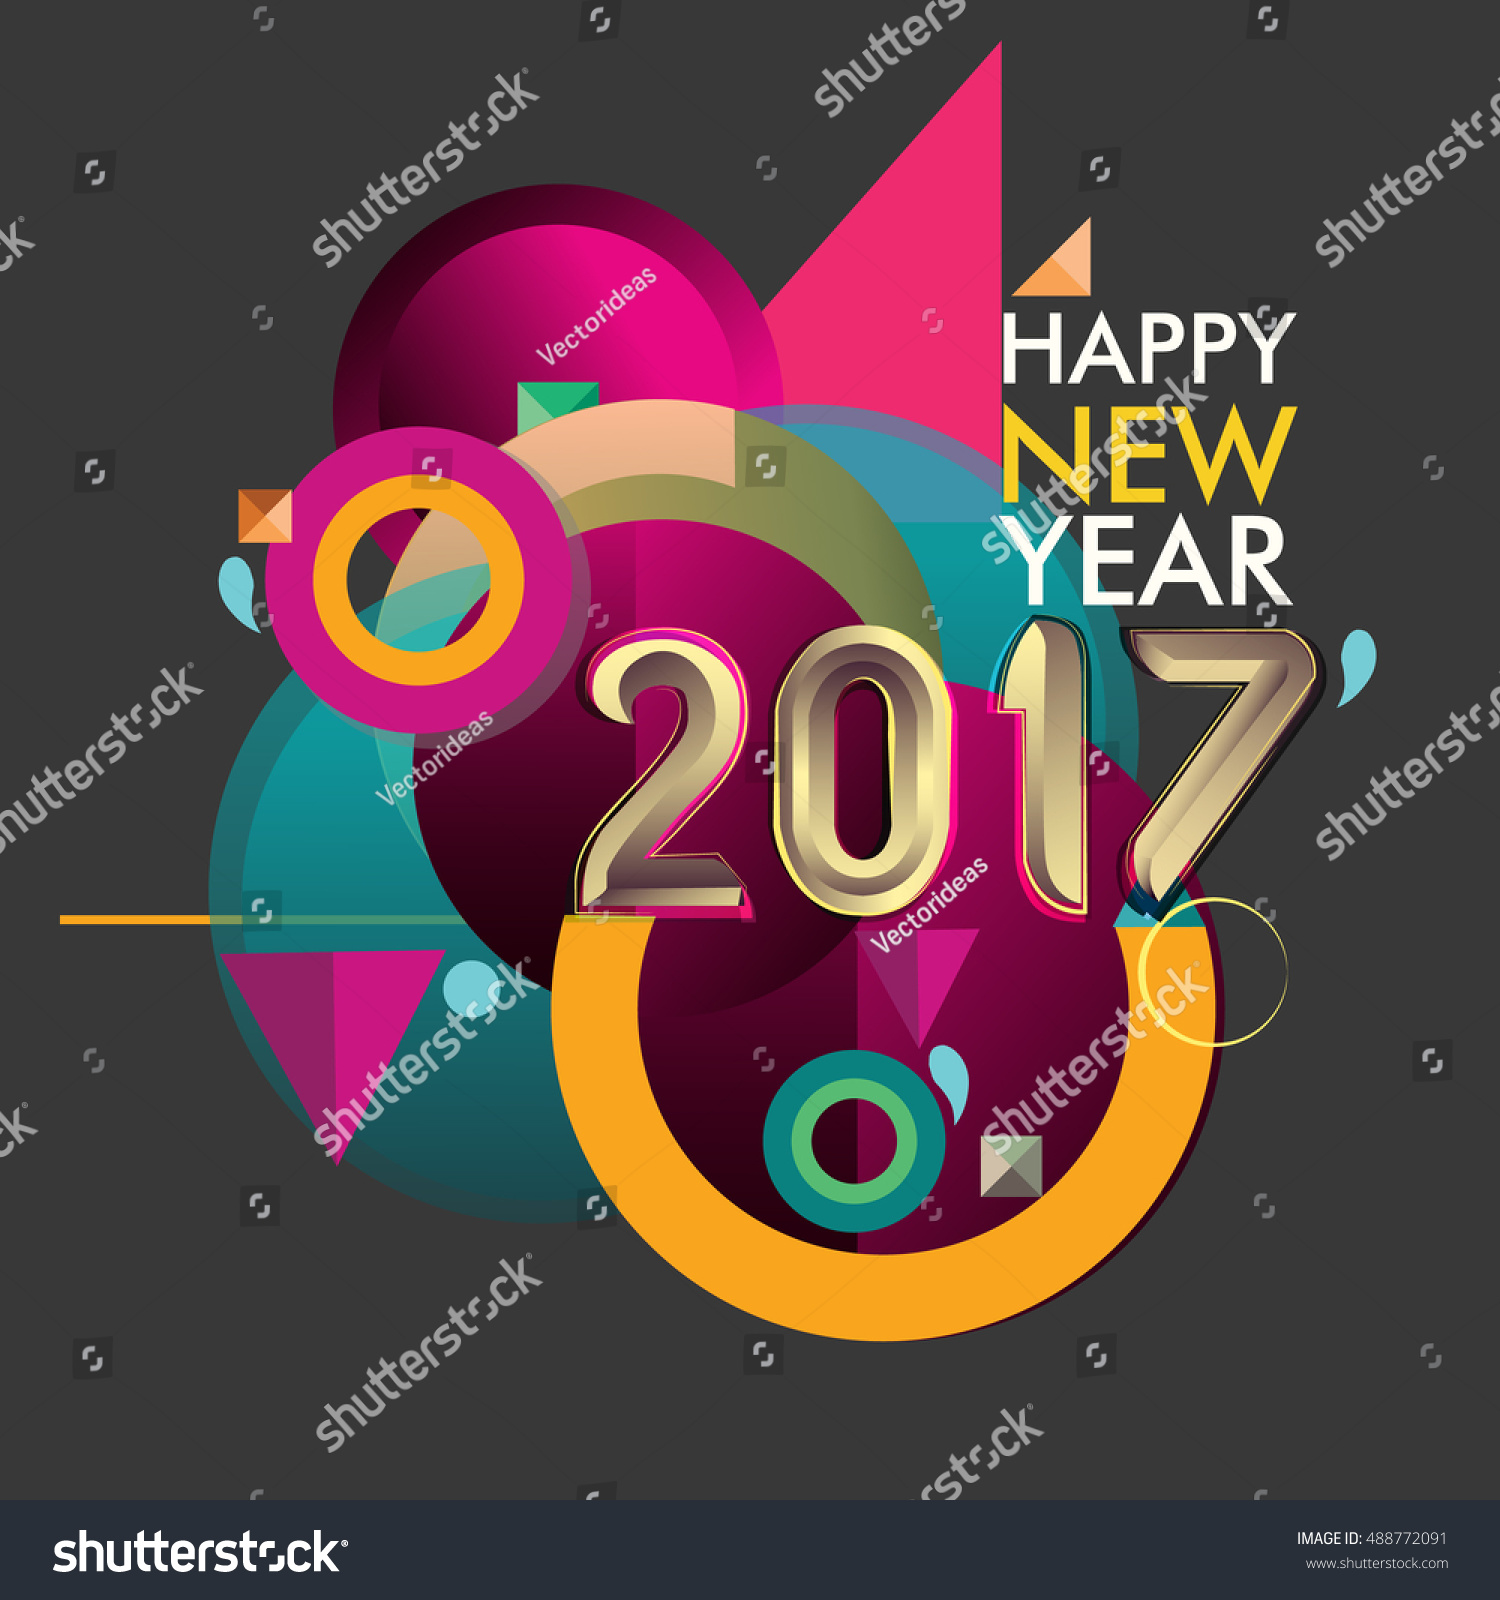 Happy New Year 2017 Colorful Vector Stock Vector 488772091 - Shutterstock